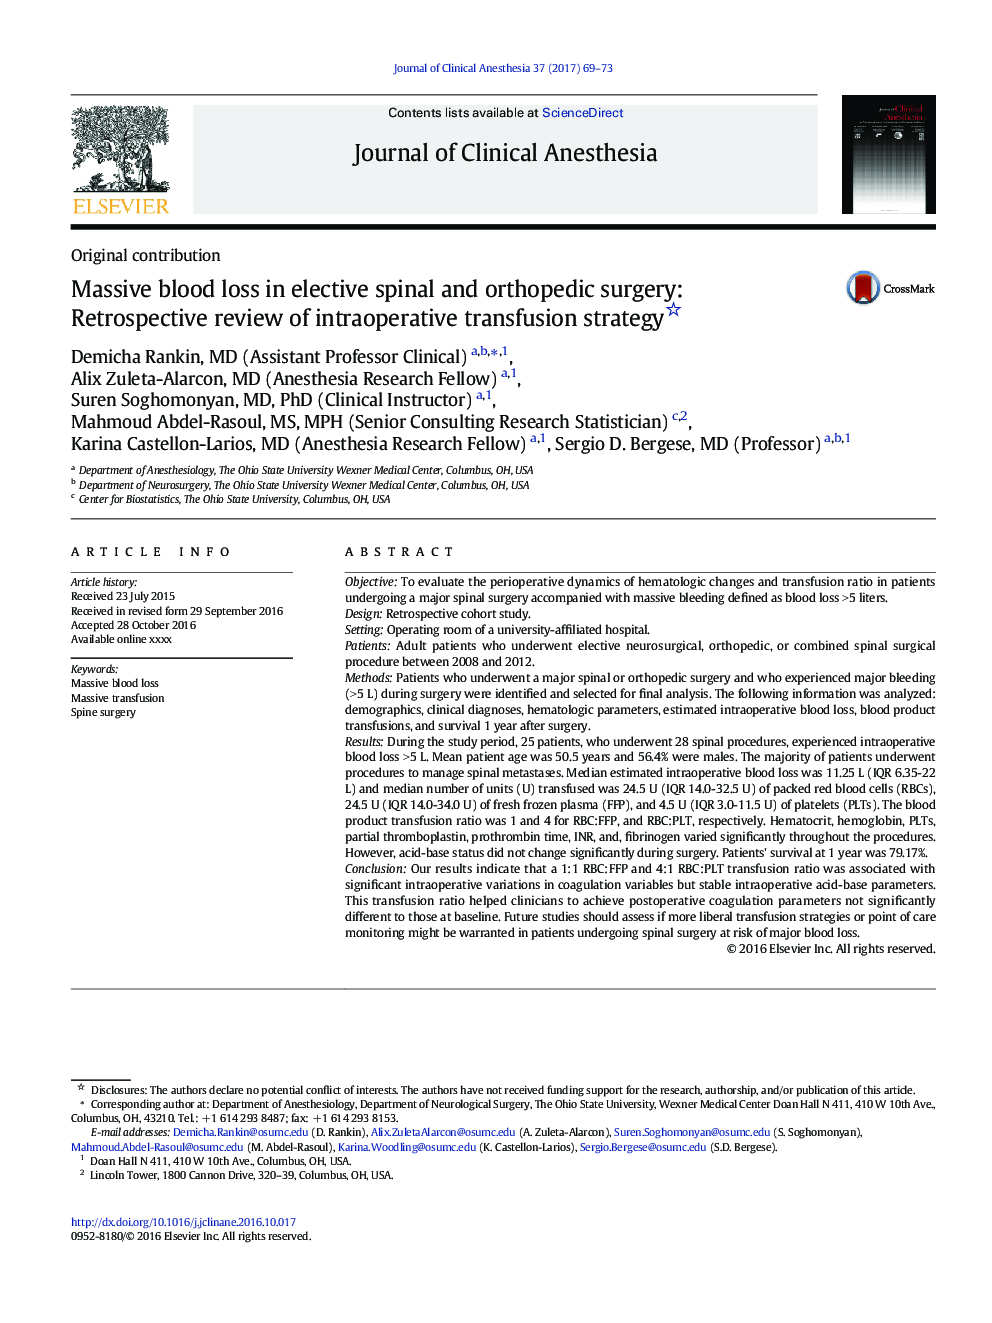 Massive blood loss in elective spinal and orthopedic surgery: Retrospective review of intraoperative transfusion strategy